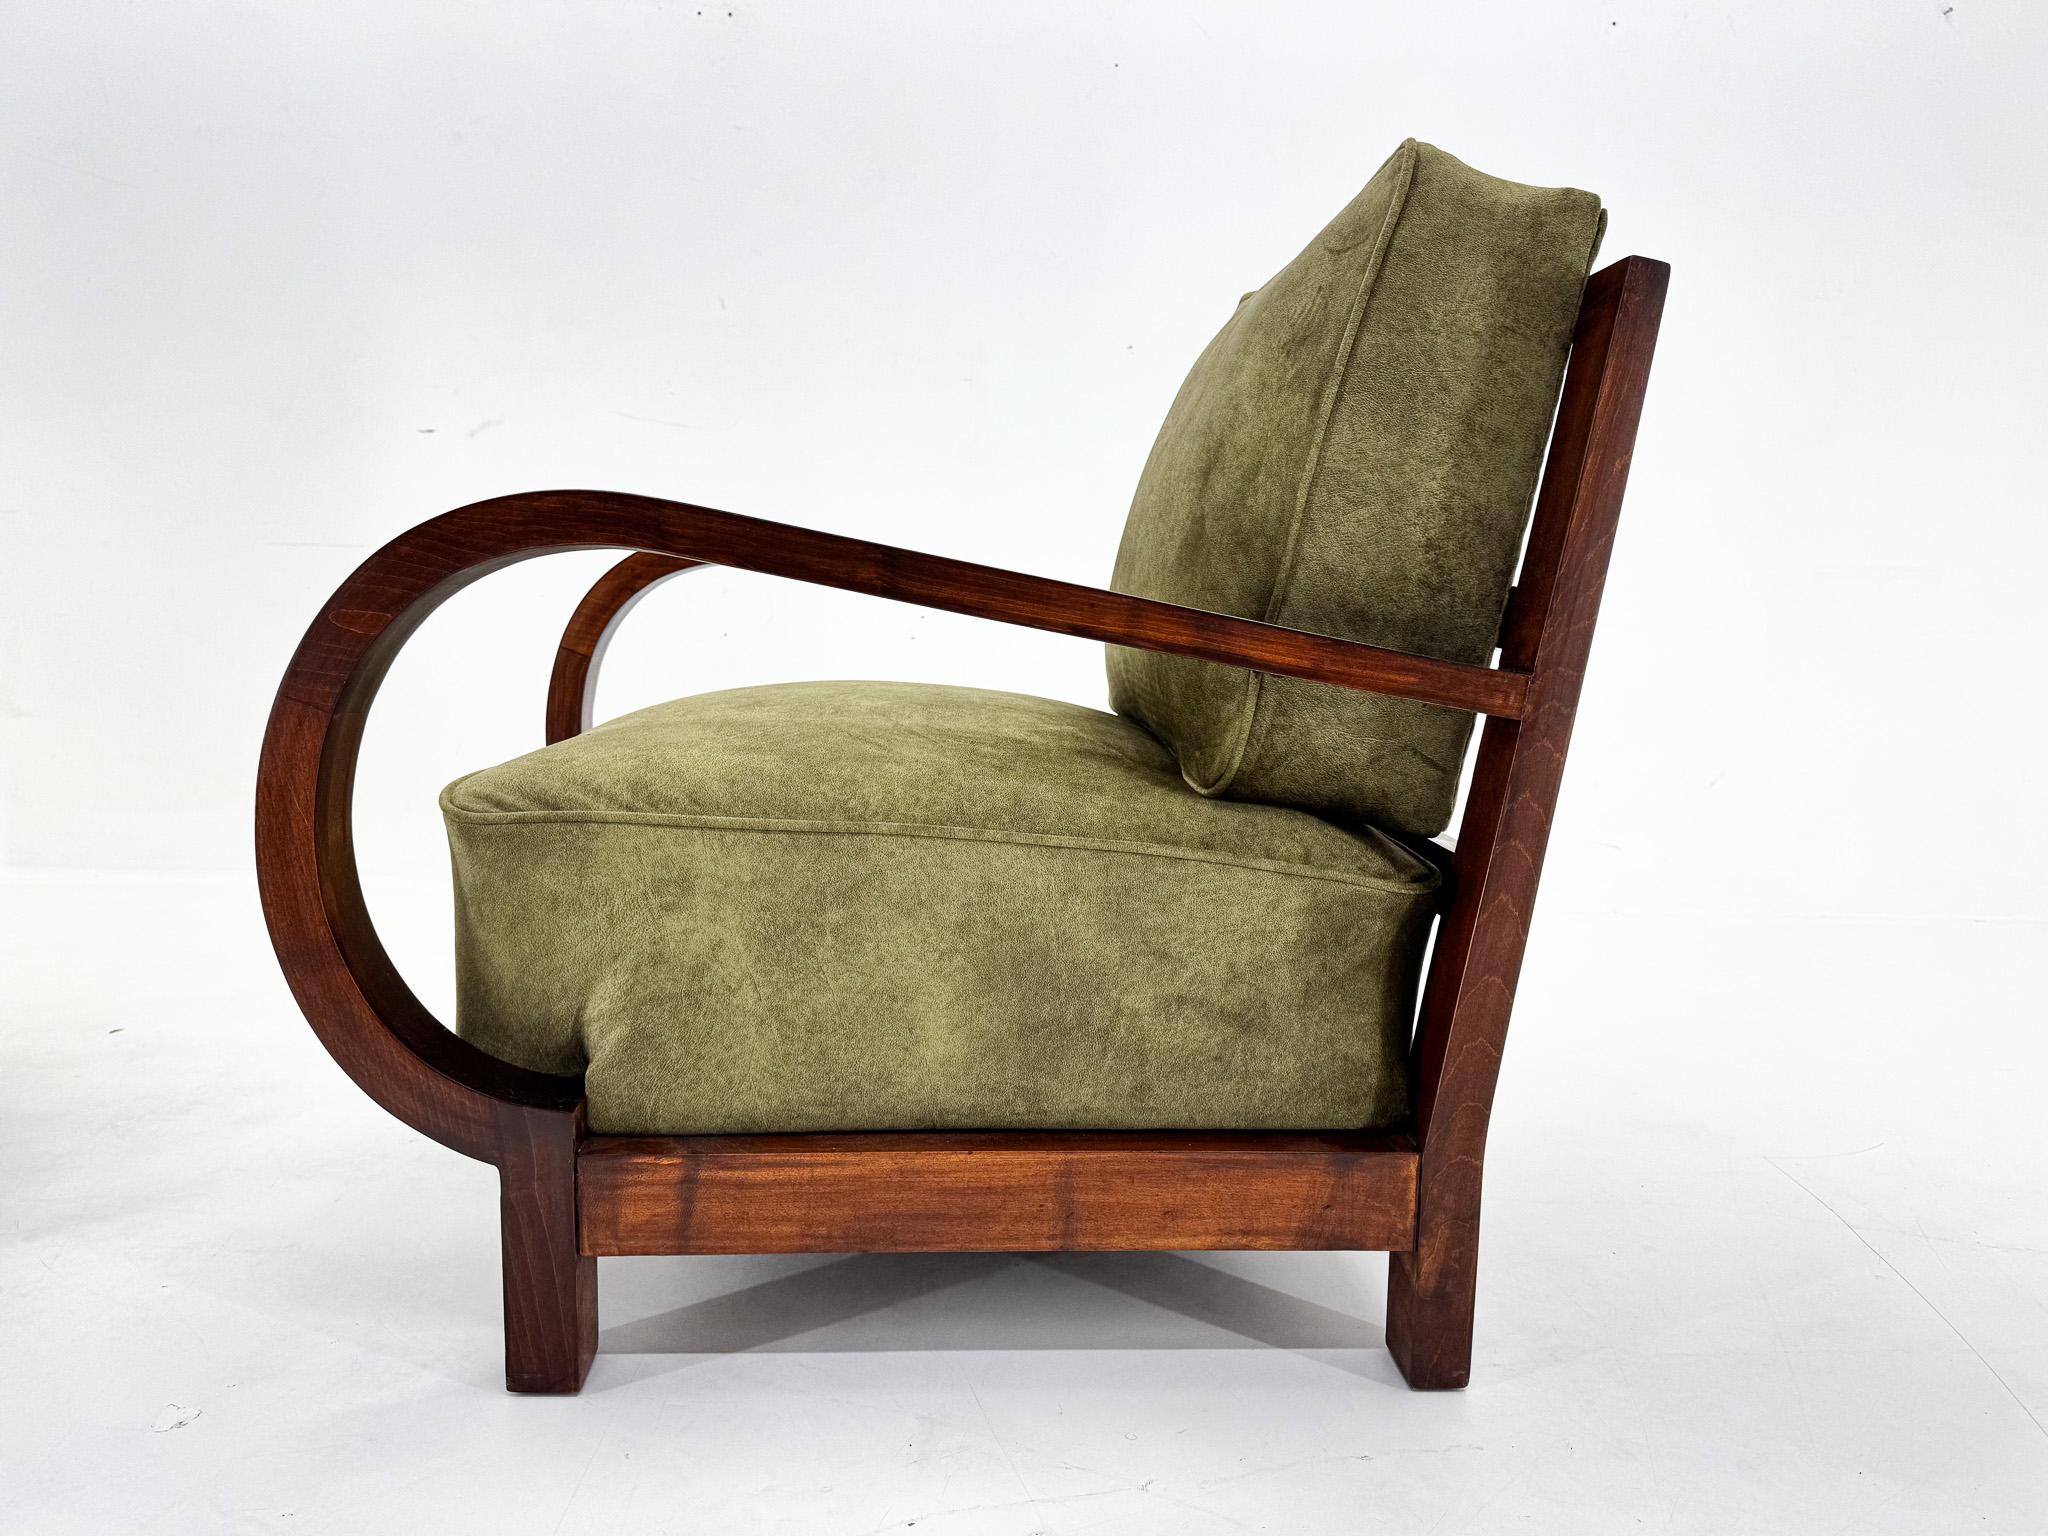 Pair of Art Deco Beech Wood Armchairs, 1930's, Newly Upholstered For Sale 7